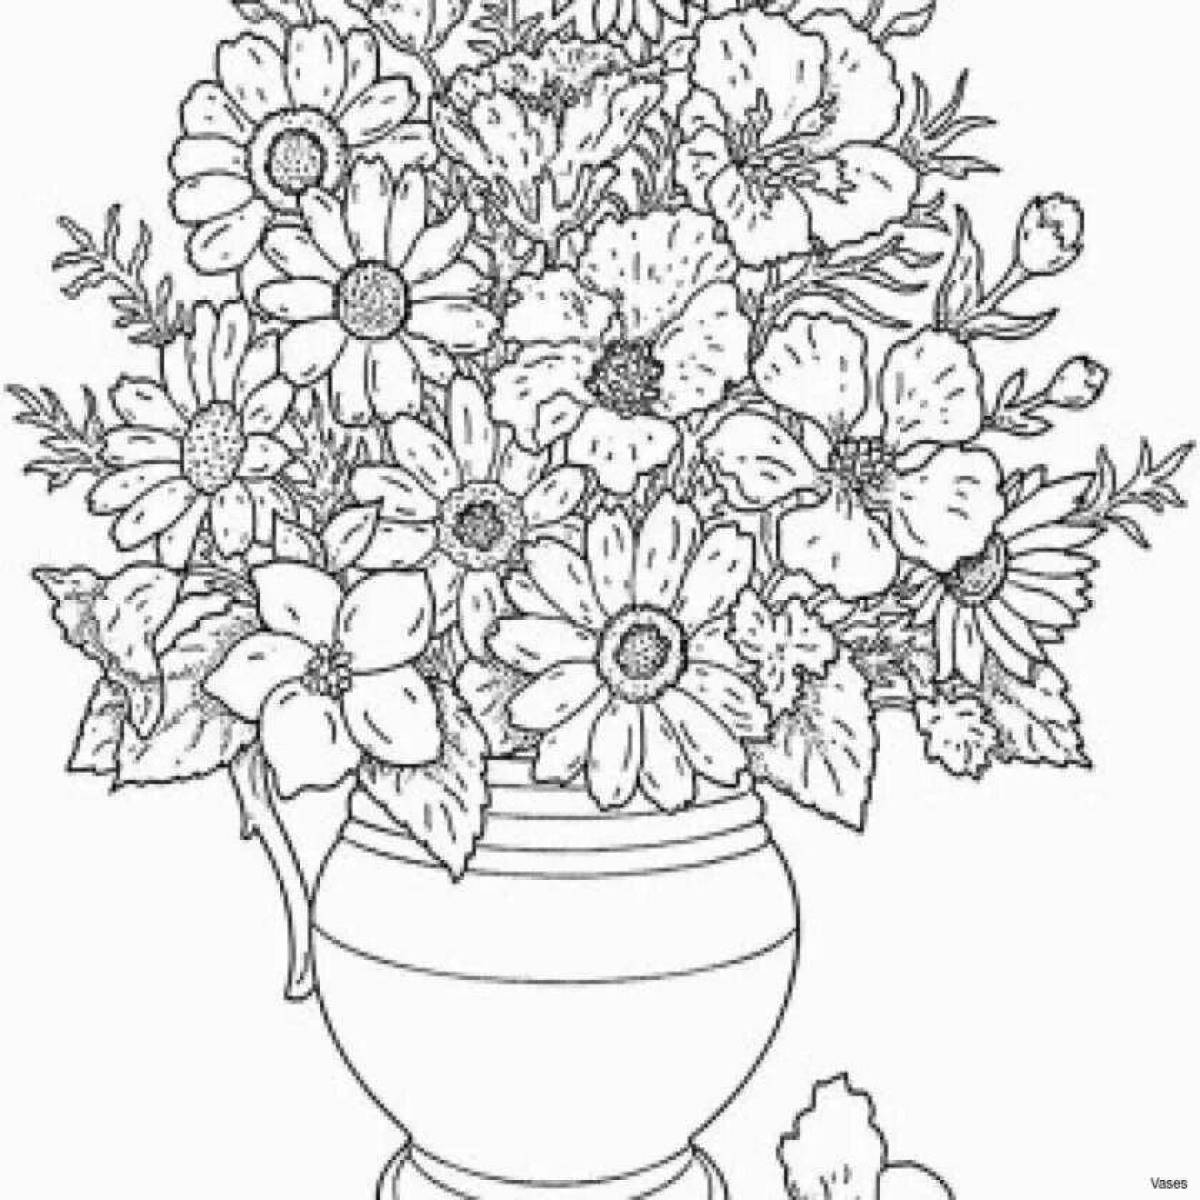 Delightful bouquet coloring book for kids